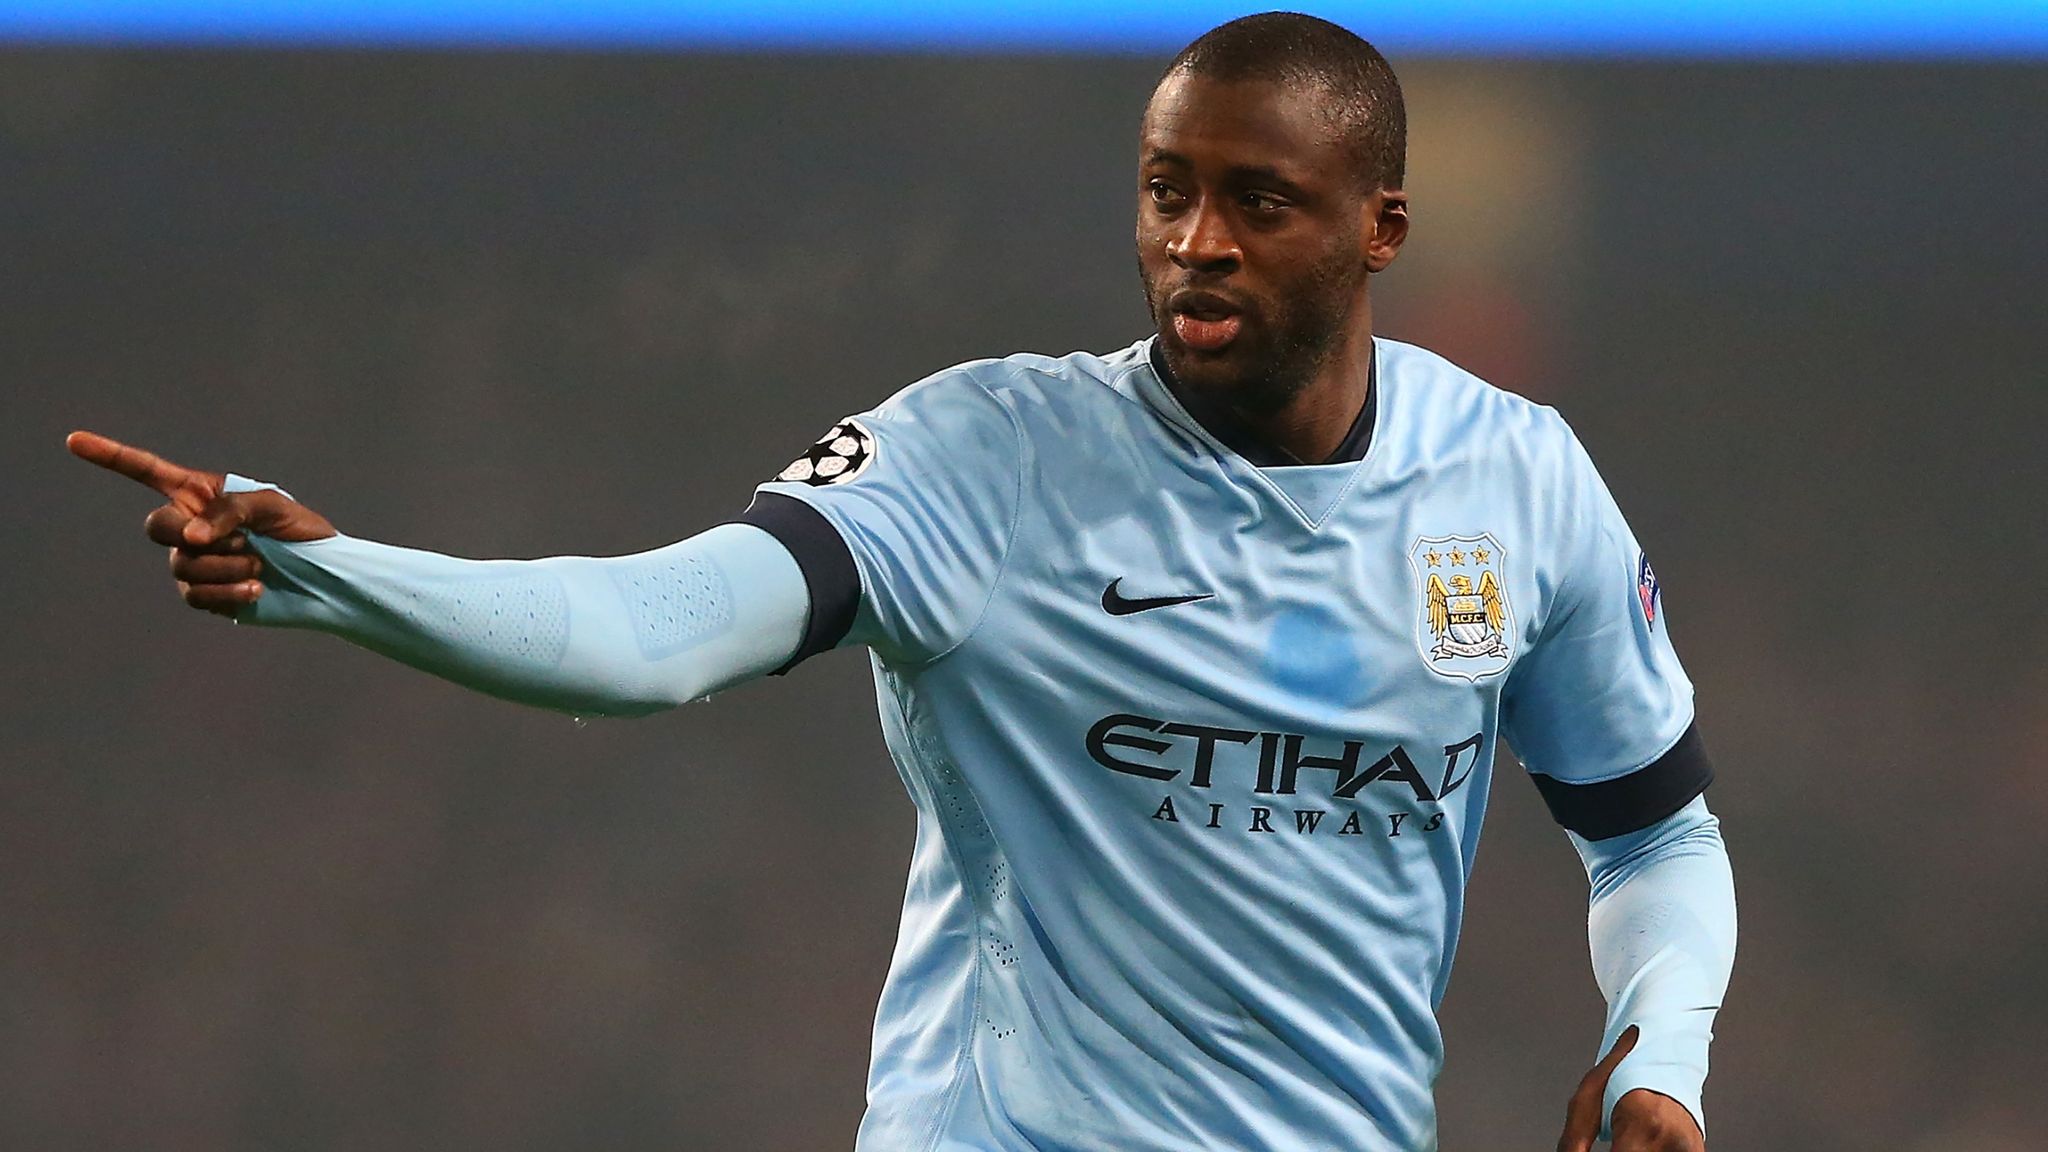 Yaya Toure is willing to return to Tottenham Hotspur in the future.